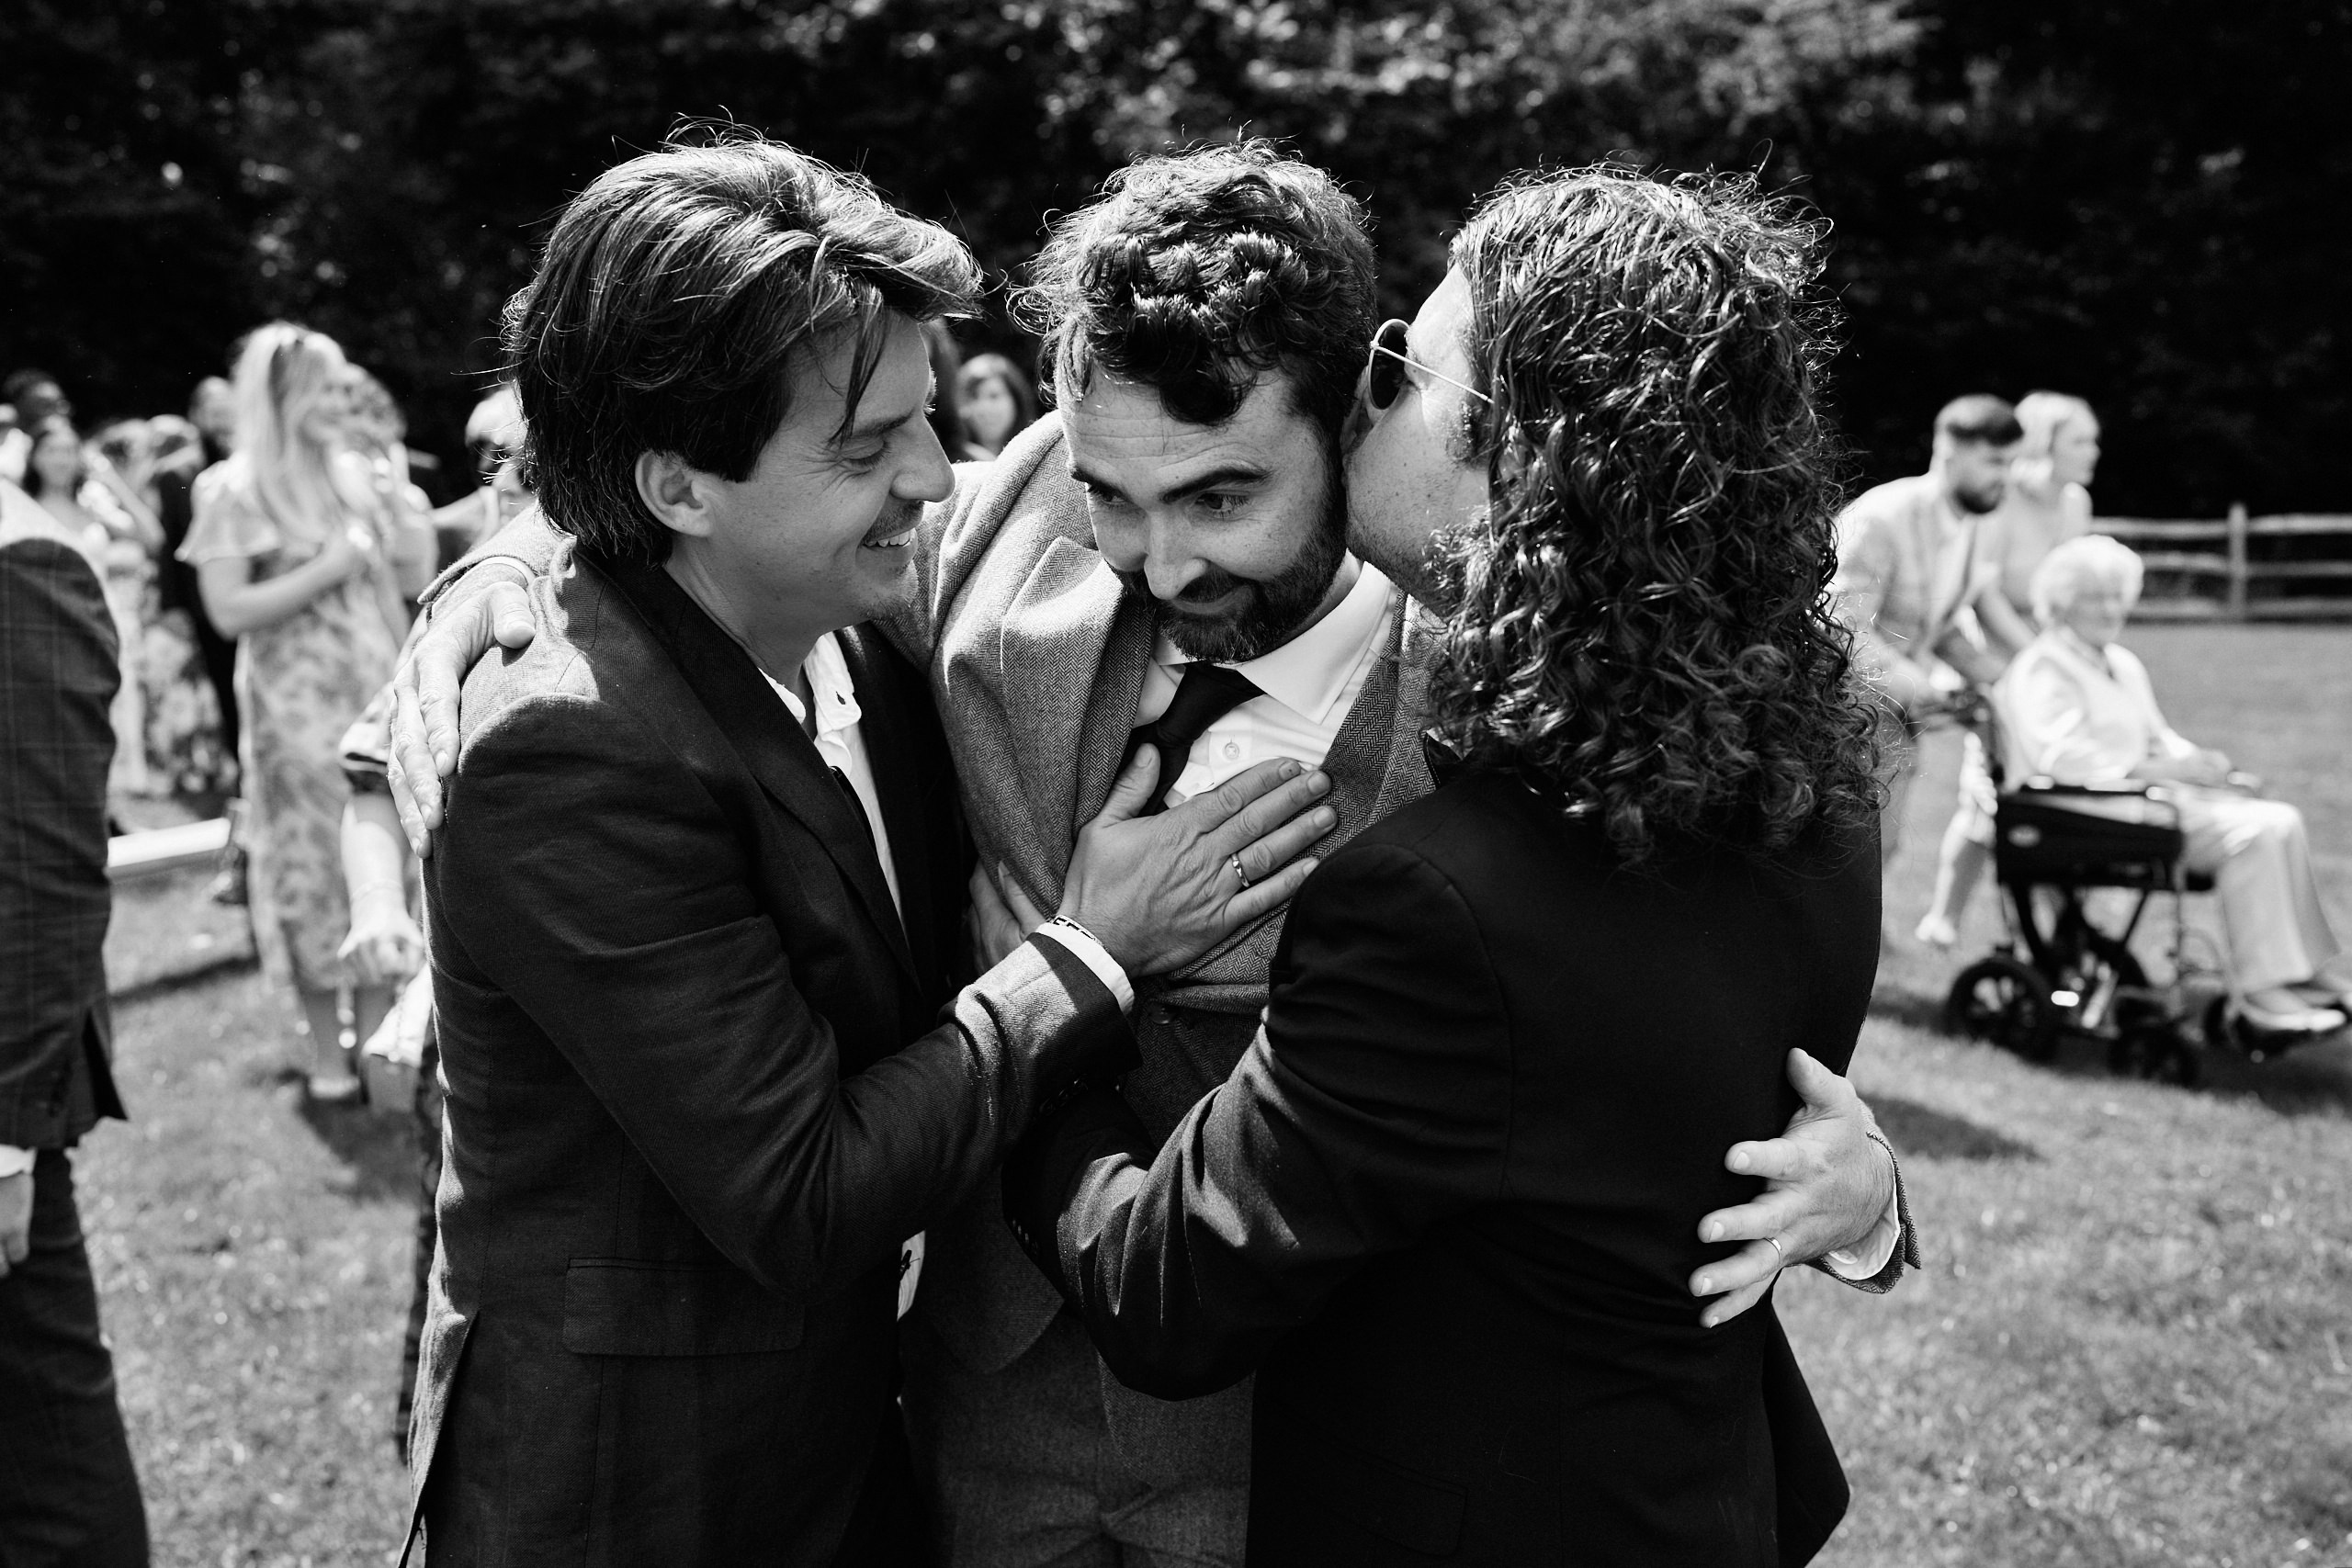 Three guys giving each other a hug at a wedding.